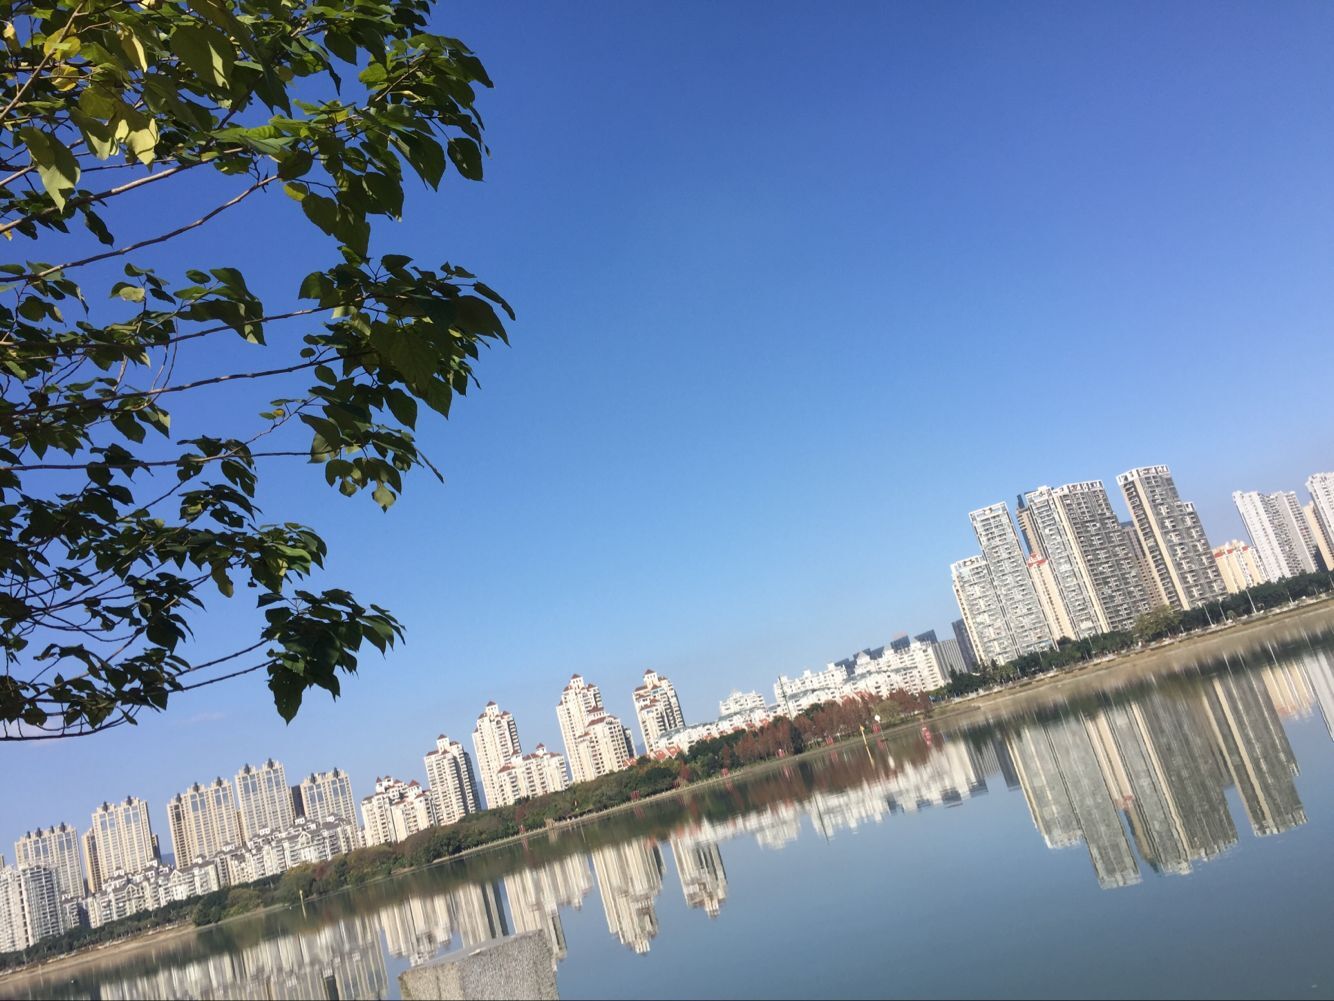 This is our city Fuzhou